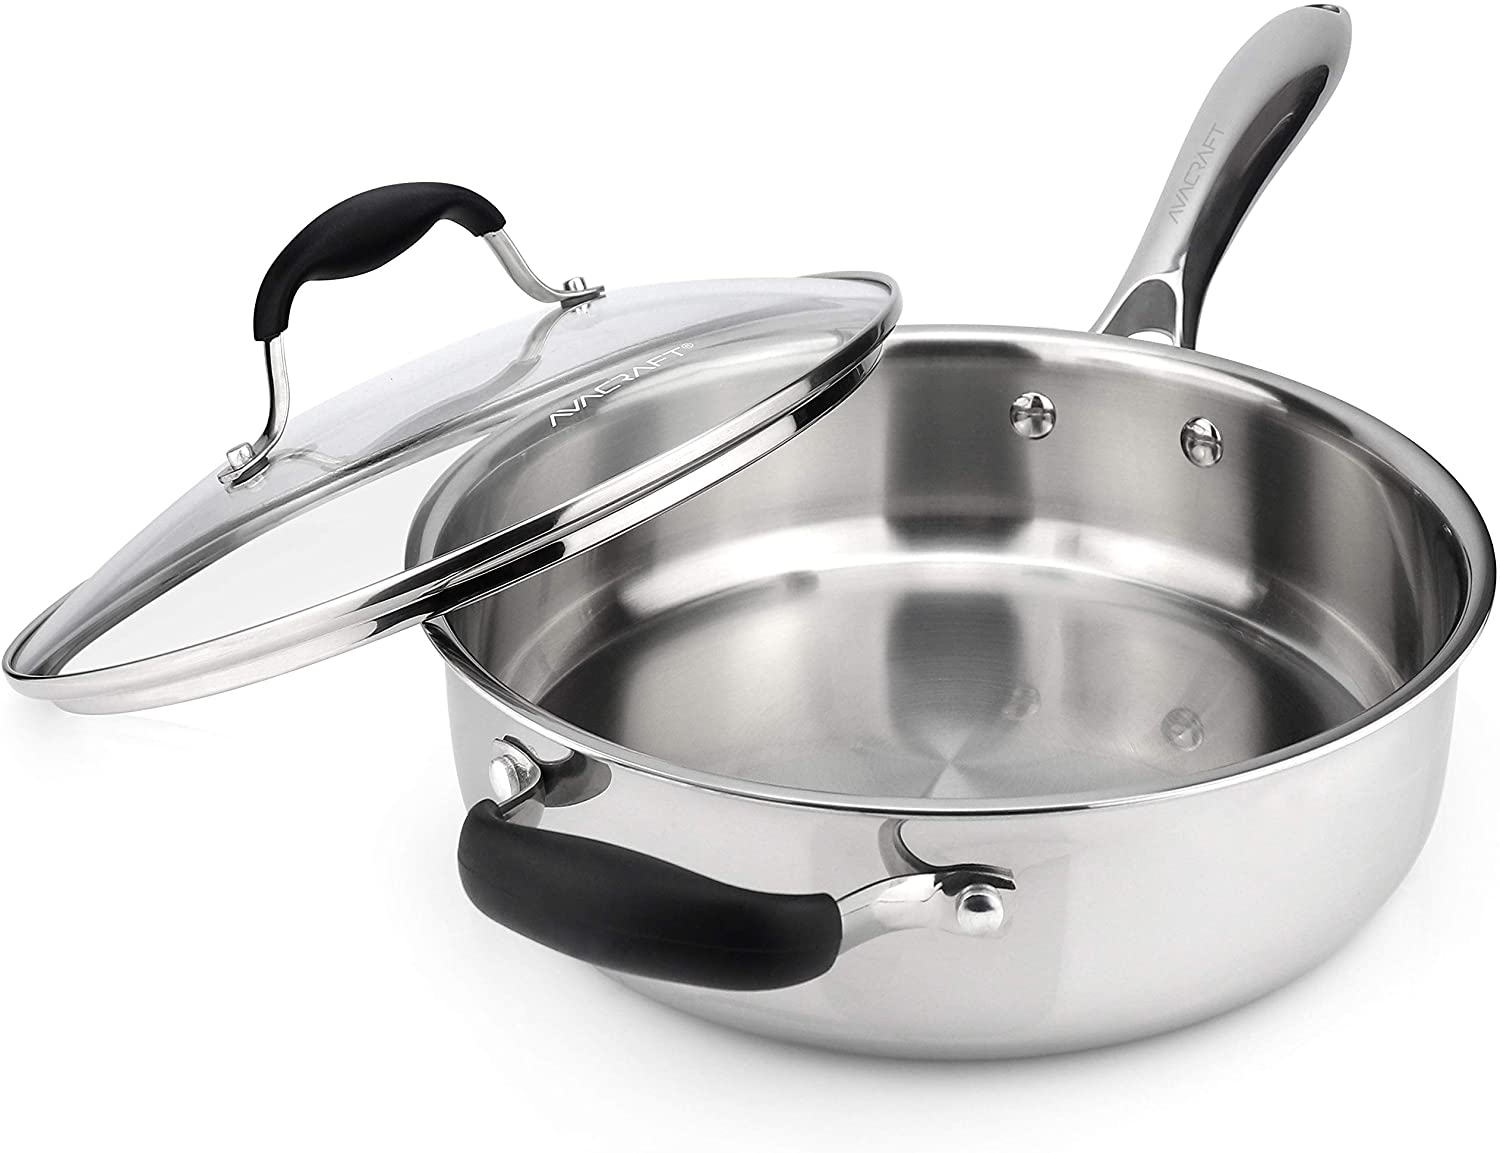 AVACRAFT 8 Inch Tri-Ply Stainless Steel Frying Pan with Lid, Side Spouts,  Induction Pan, Versatile Stainless Steel Skillet, Fry Pan in our Pots and